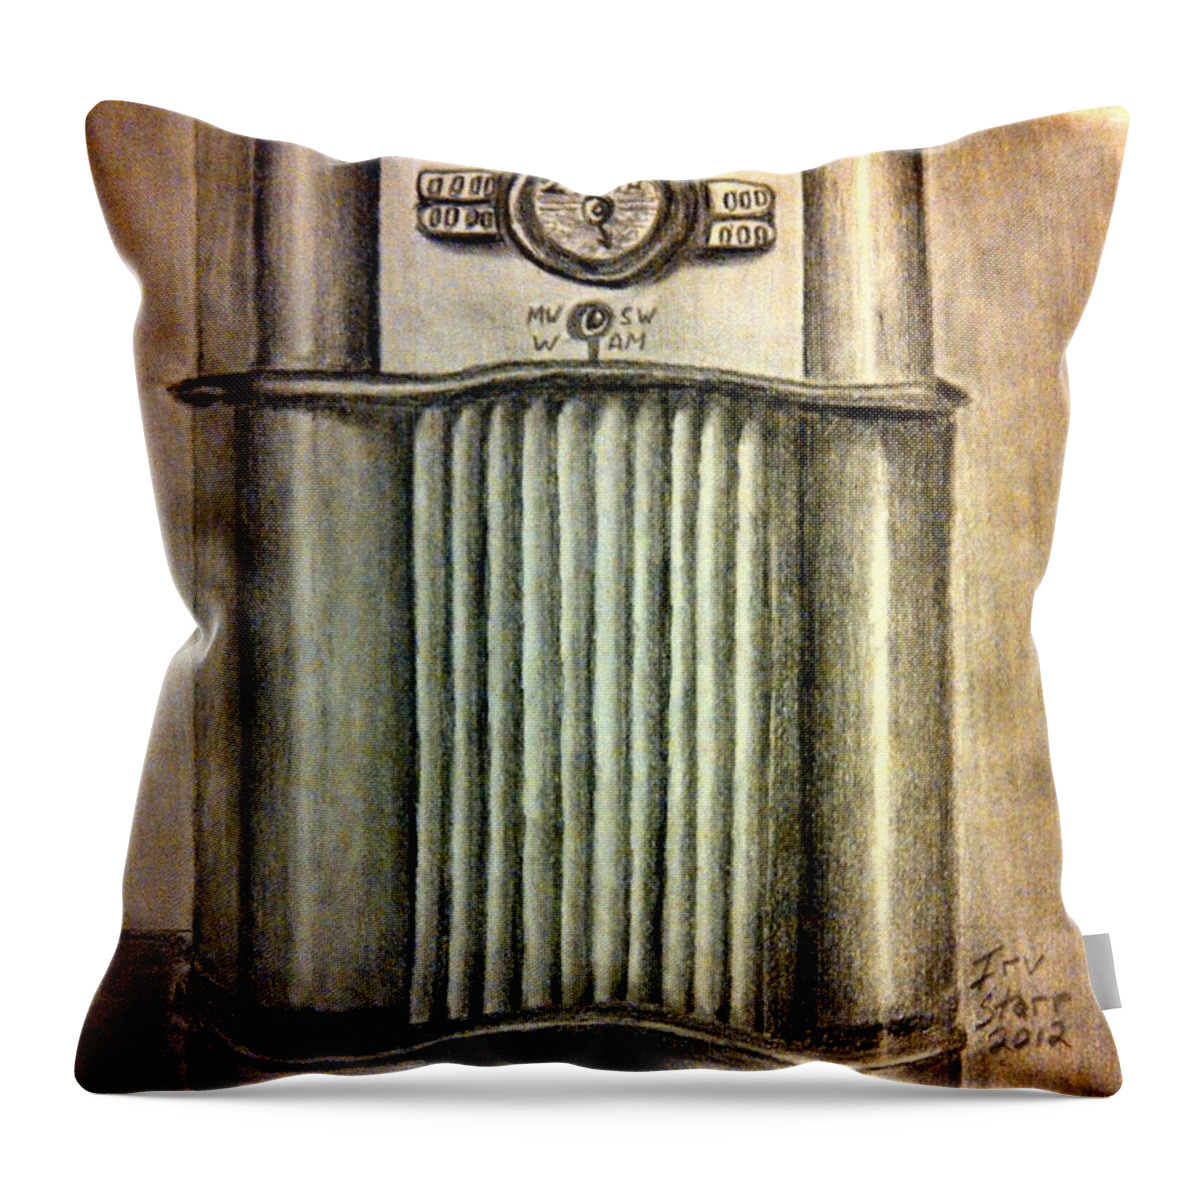 Rspeaker Throw Pillow featuring the drawing Zenith Radio by Irving Starr